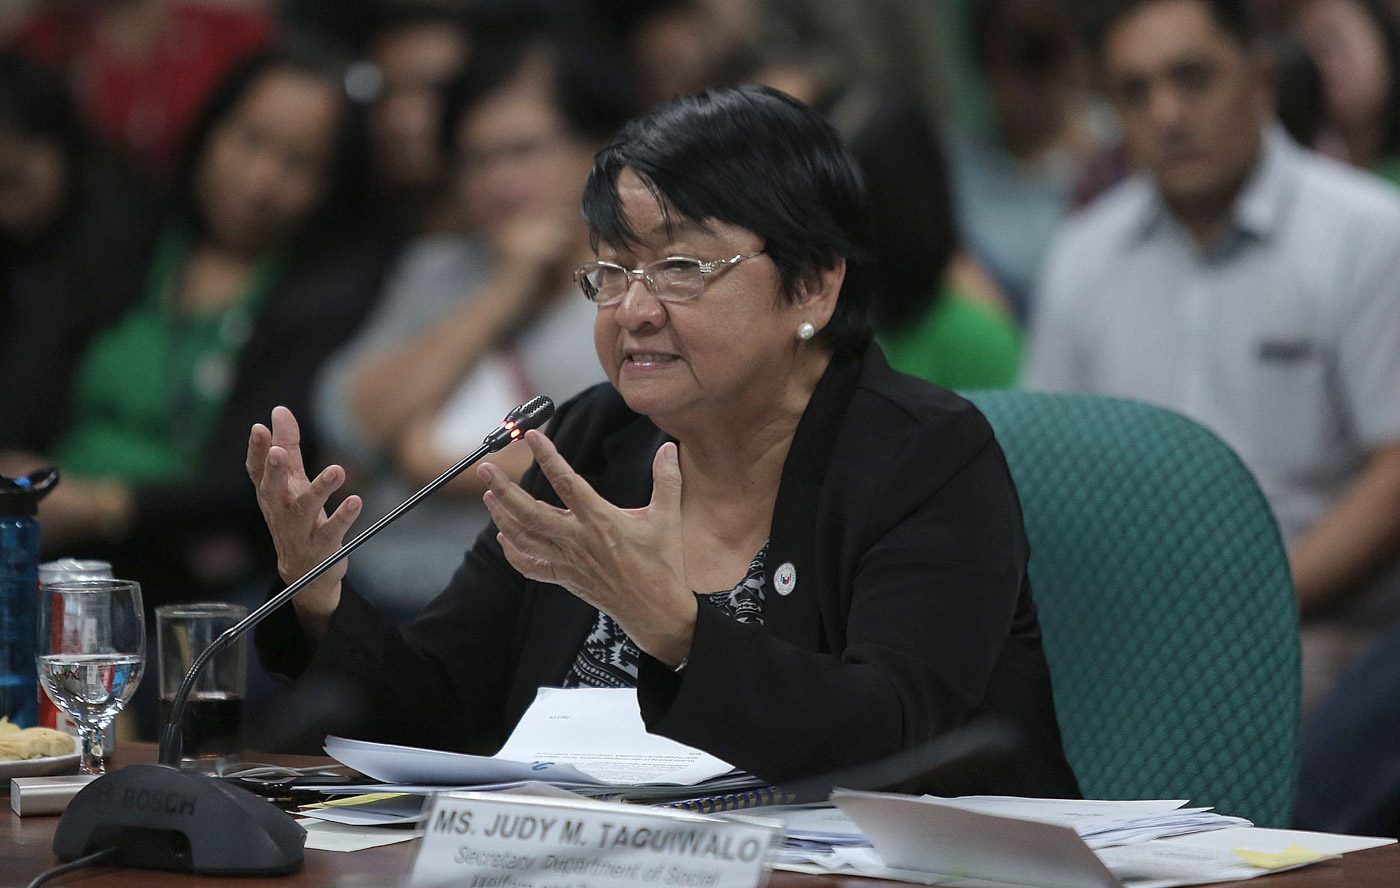 CA rejects Taguiwalo as DSWD chief